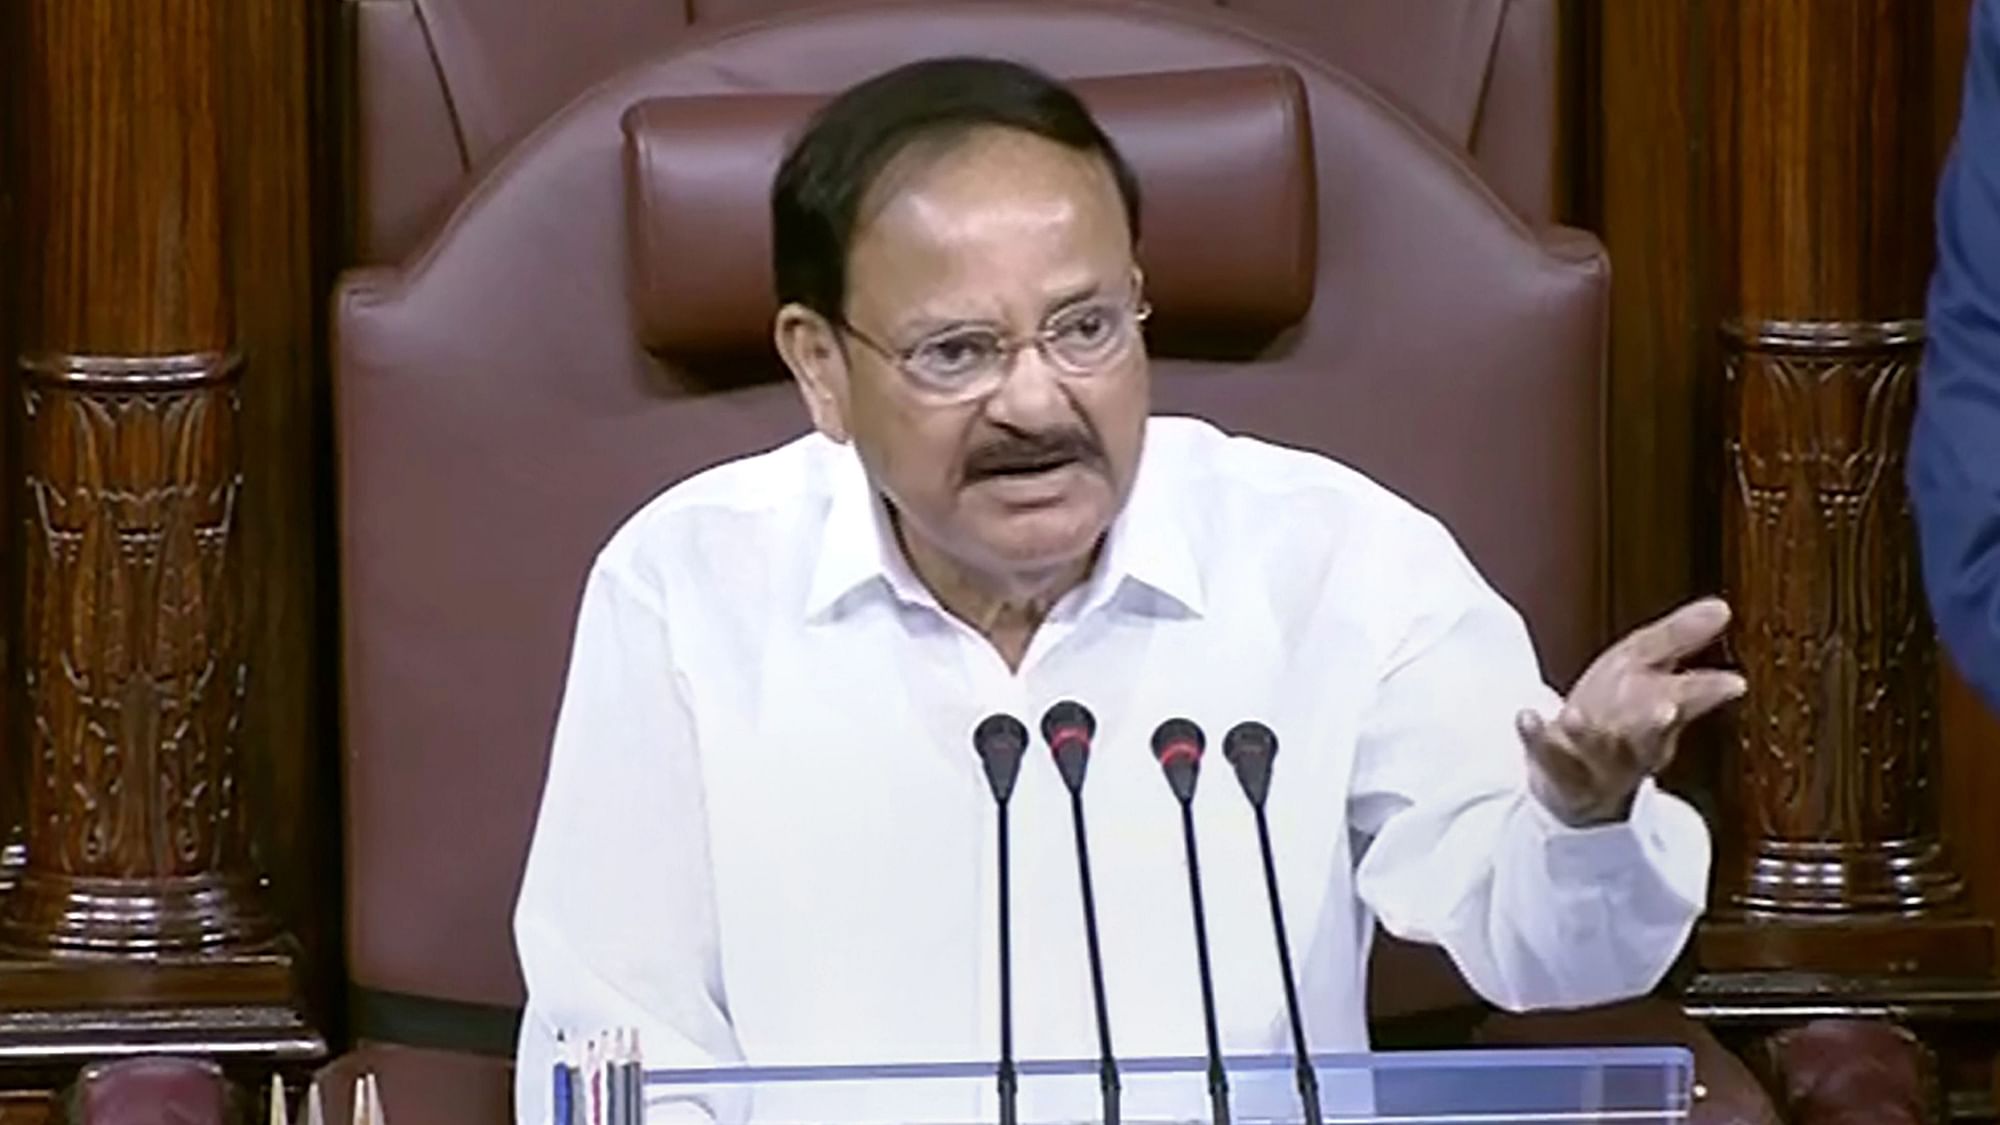 <div class="paragraphs"><p>Rajya Sabha Chairman M Venkaiah Naidu on Friday clarified that members of Parliament do not enjoy any immunity from arrest in criminal cases when the House is in session and they cannot avoid summons issued by law enforcement agencies.</p></div>